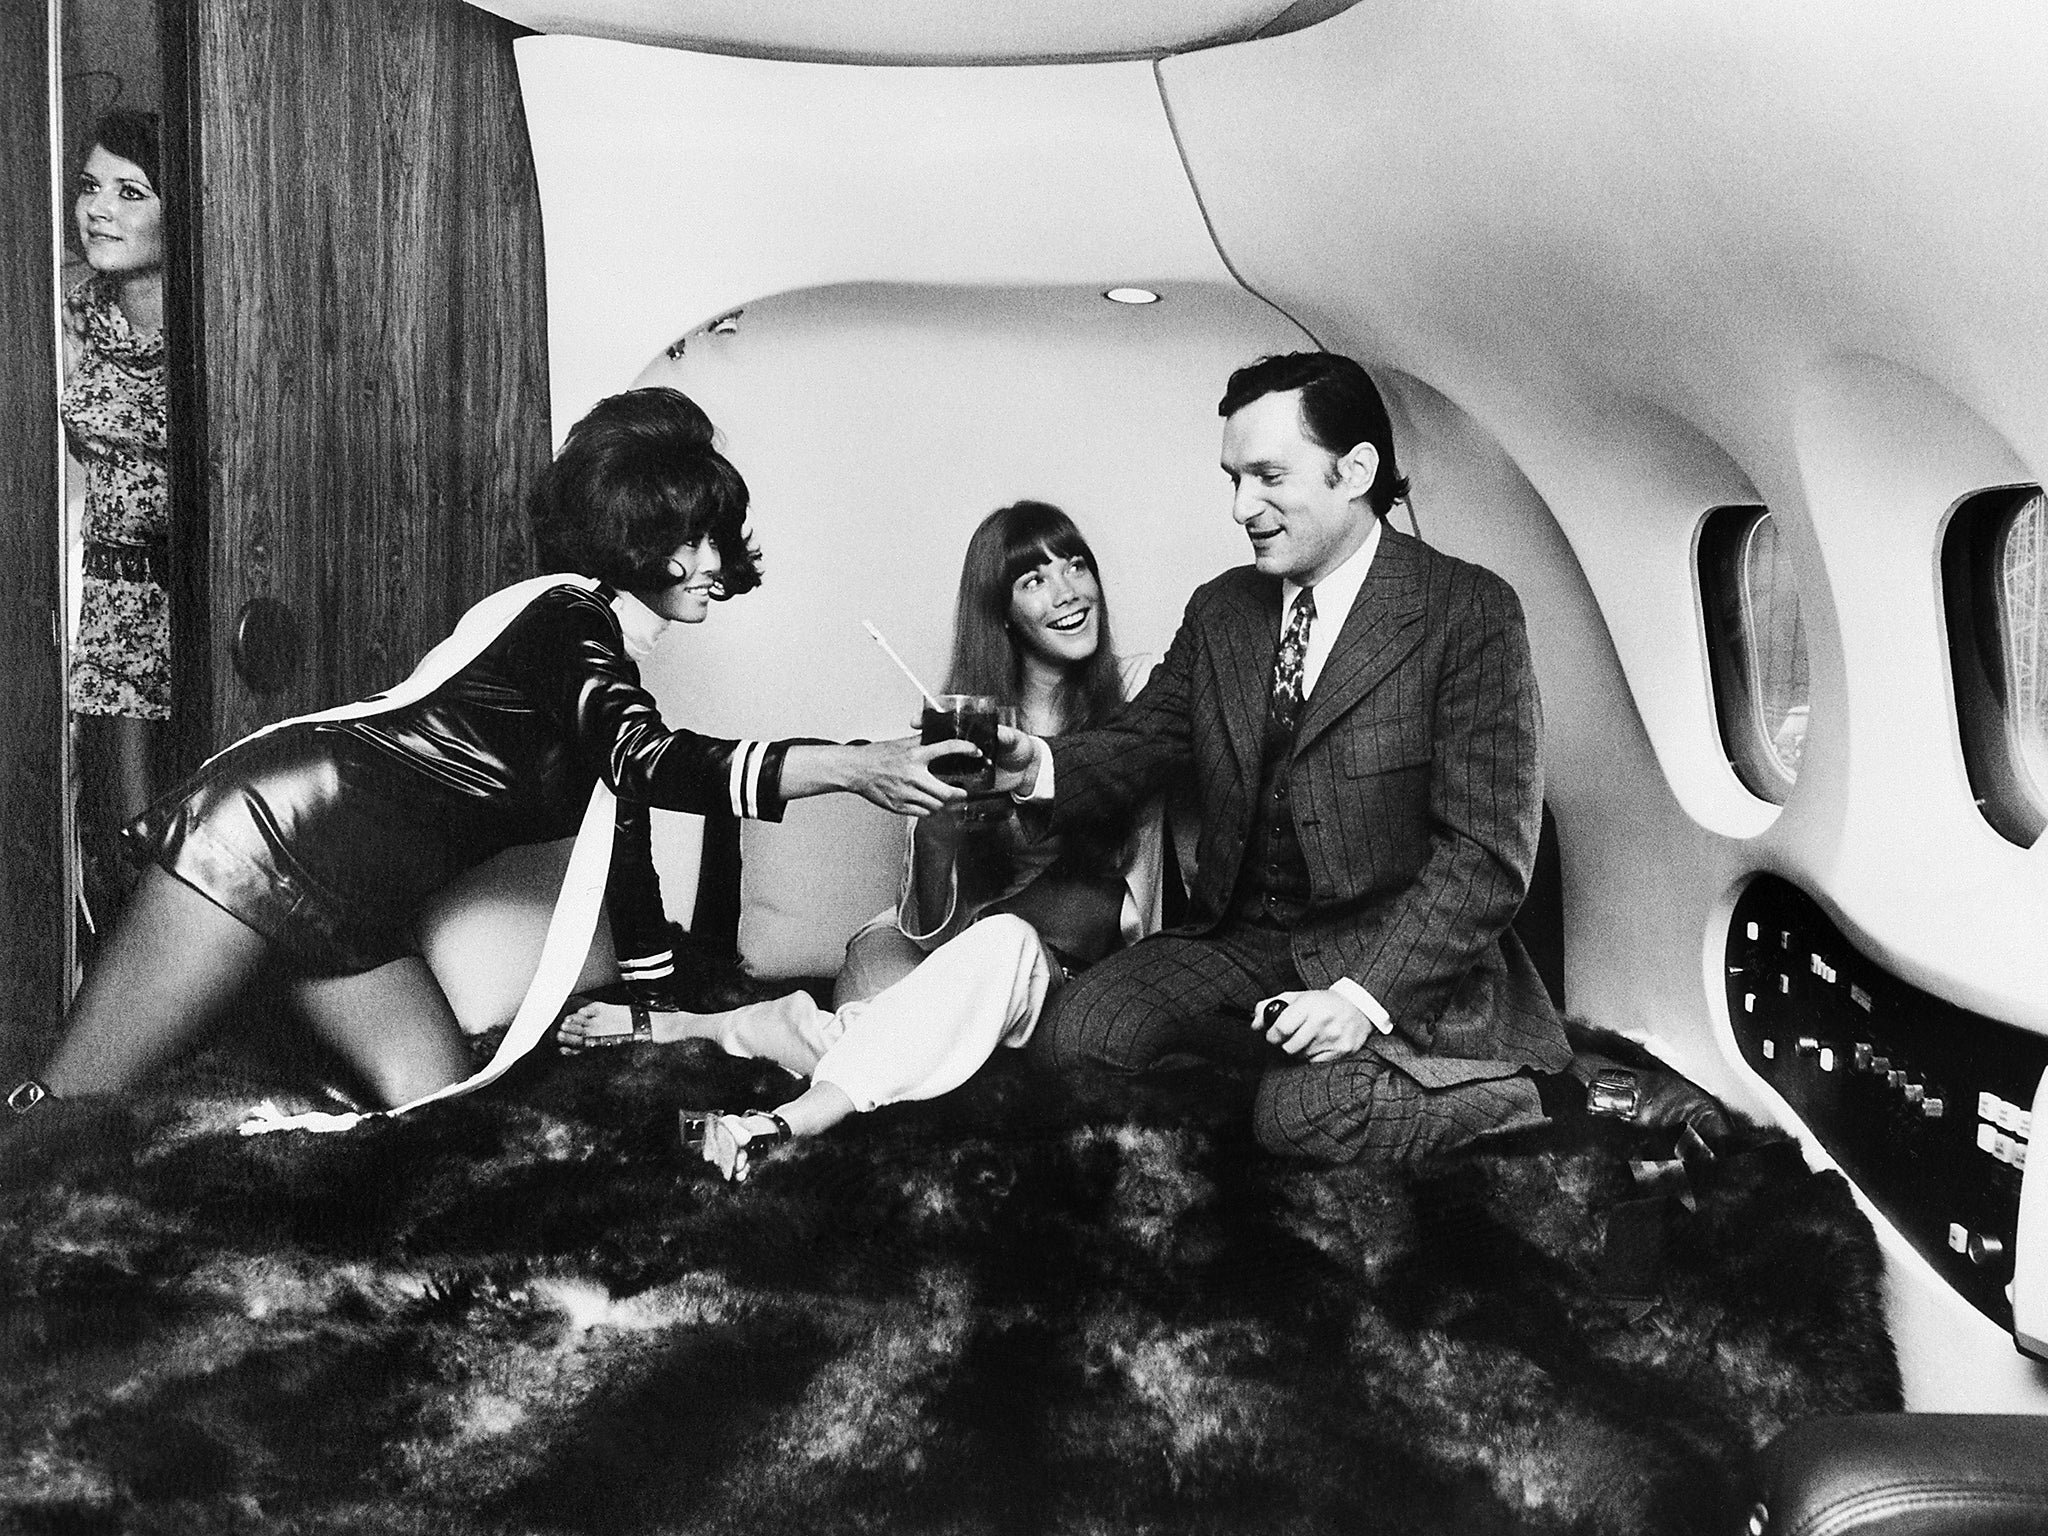 Mile high club: Hugh Hefner with his then girlfriend, actress Barbi Benton, and other playmates aboard the Playboy jet ‘Big Bunny’ in 1970